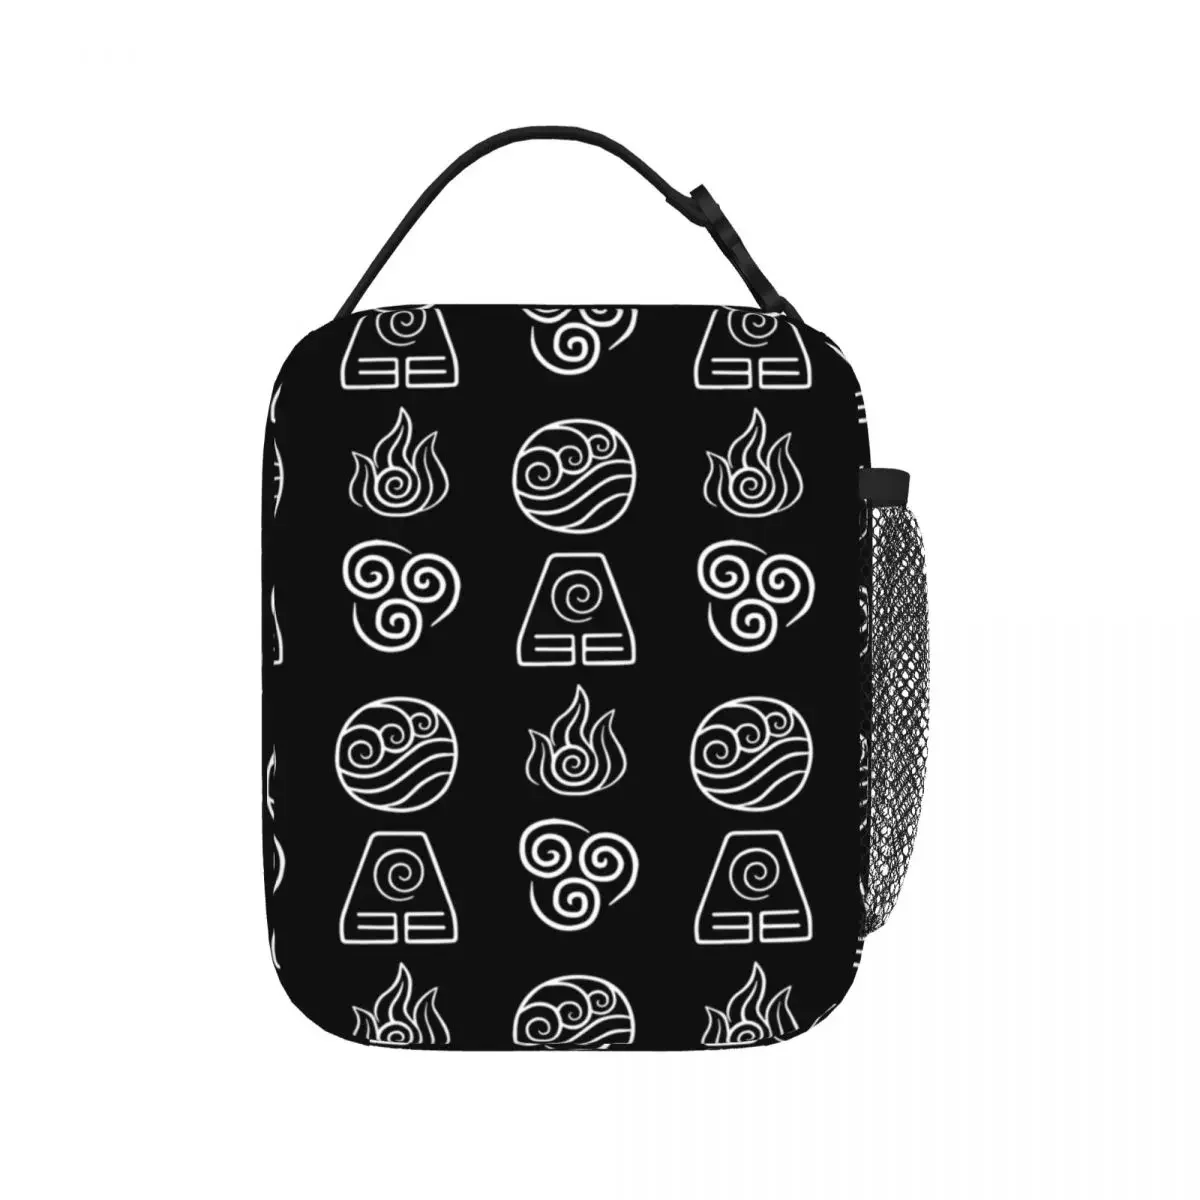 

Avatar - The Four Elements Insulated Lunch Bags Picnic Bags Thermal Cooler Lunch Box Lunch Tote for Woman Work Children School